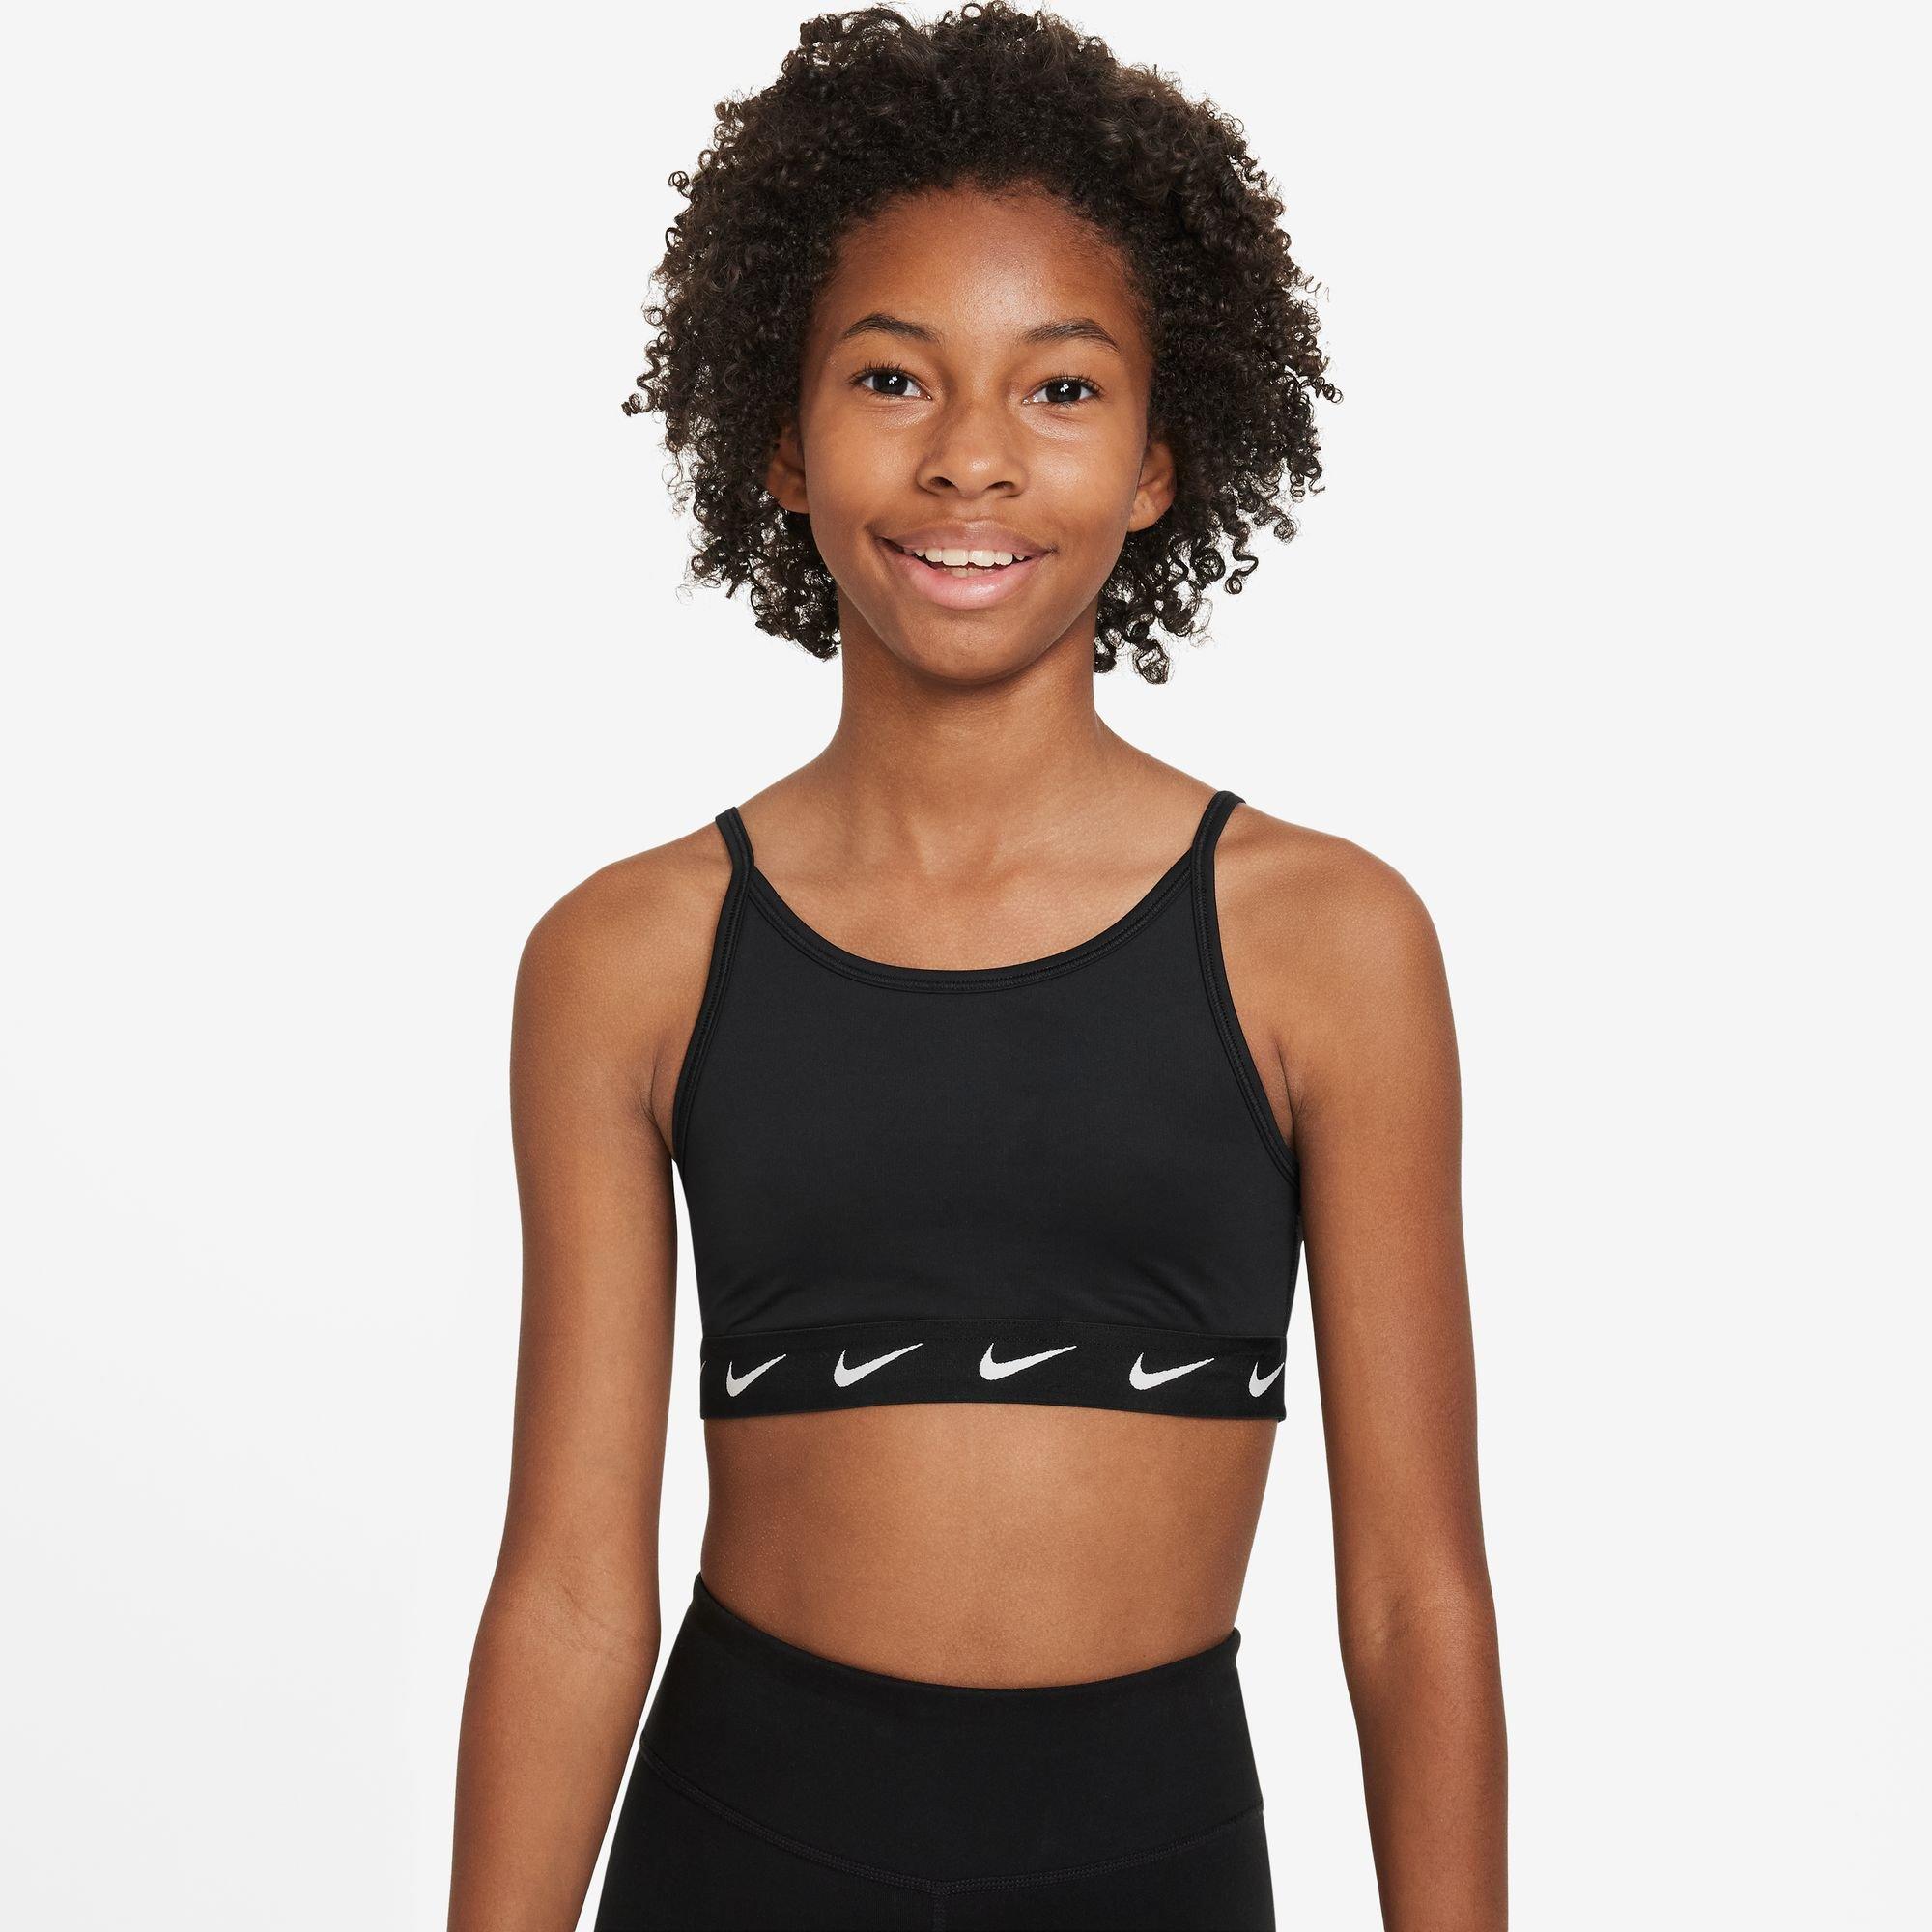 Girls under Armour sports bra. Size youth small.